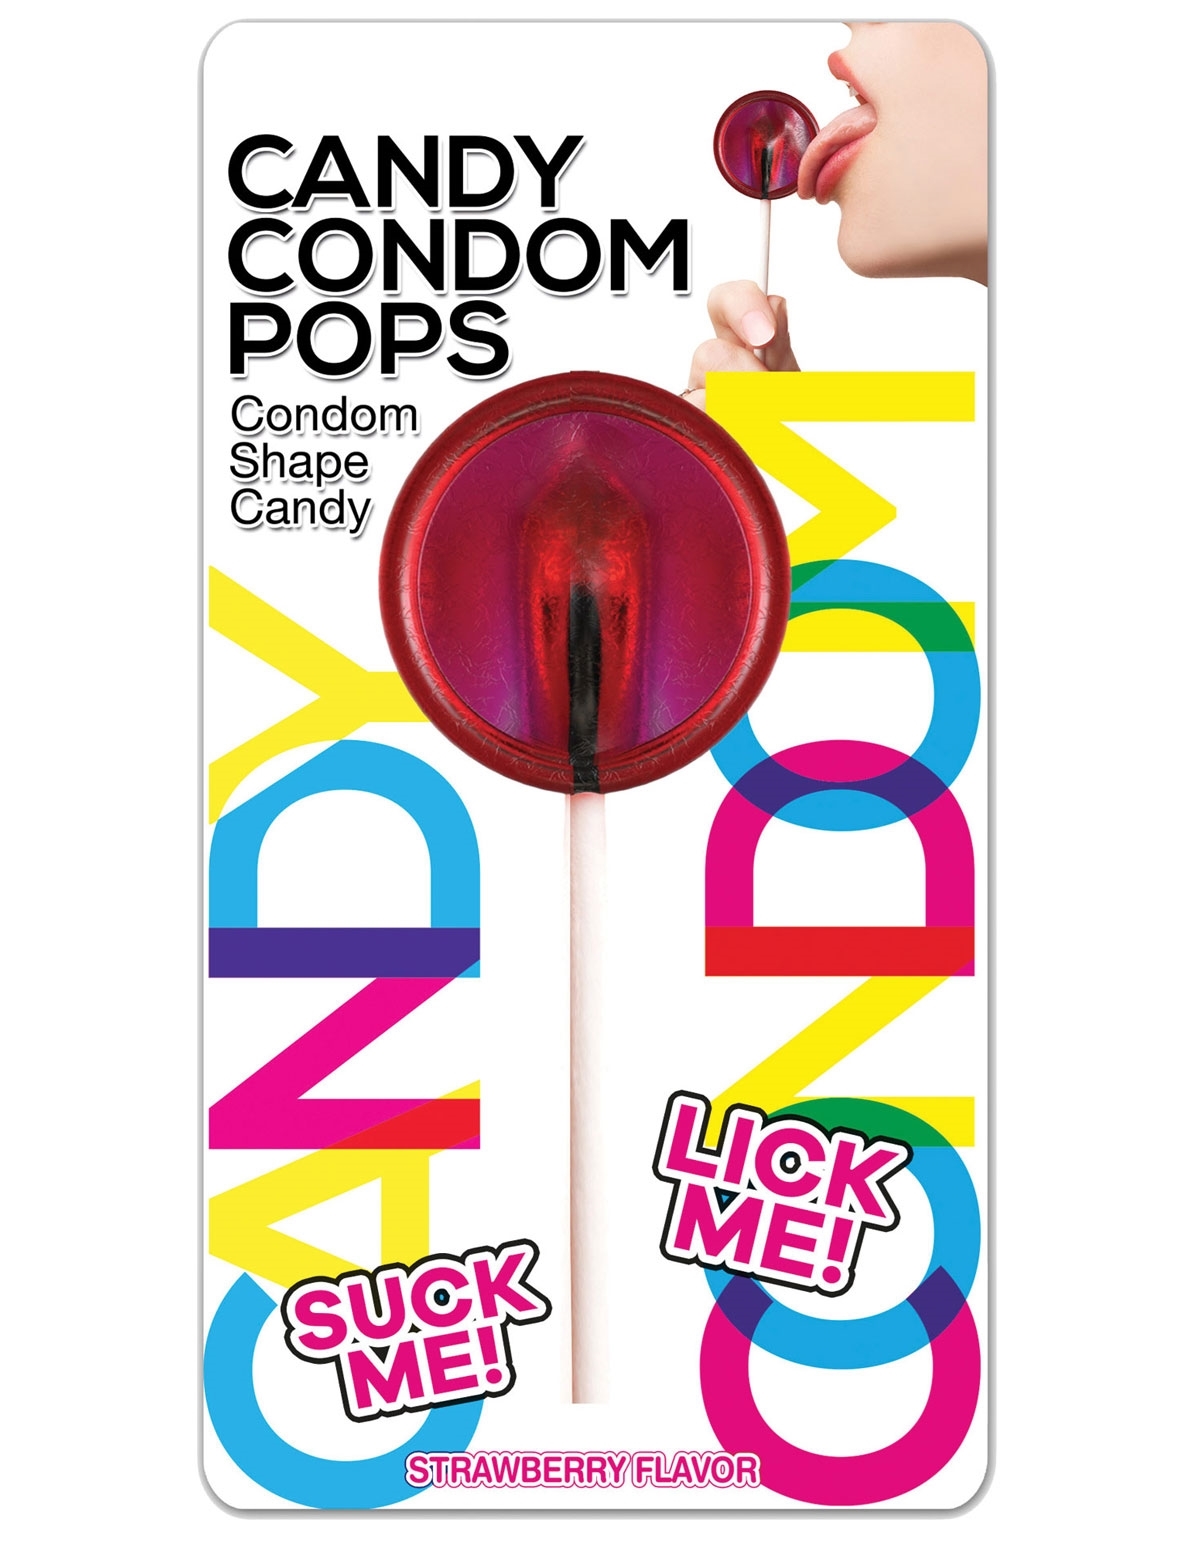 alternate image for Candy Condom Pops - Strawberry